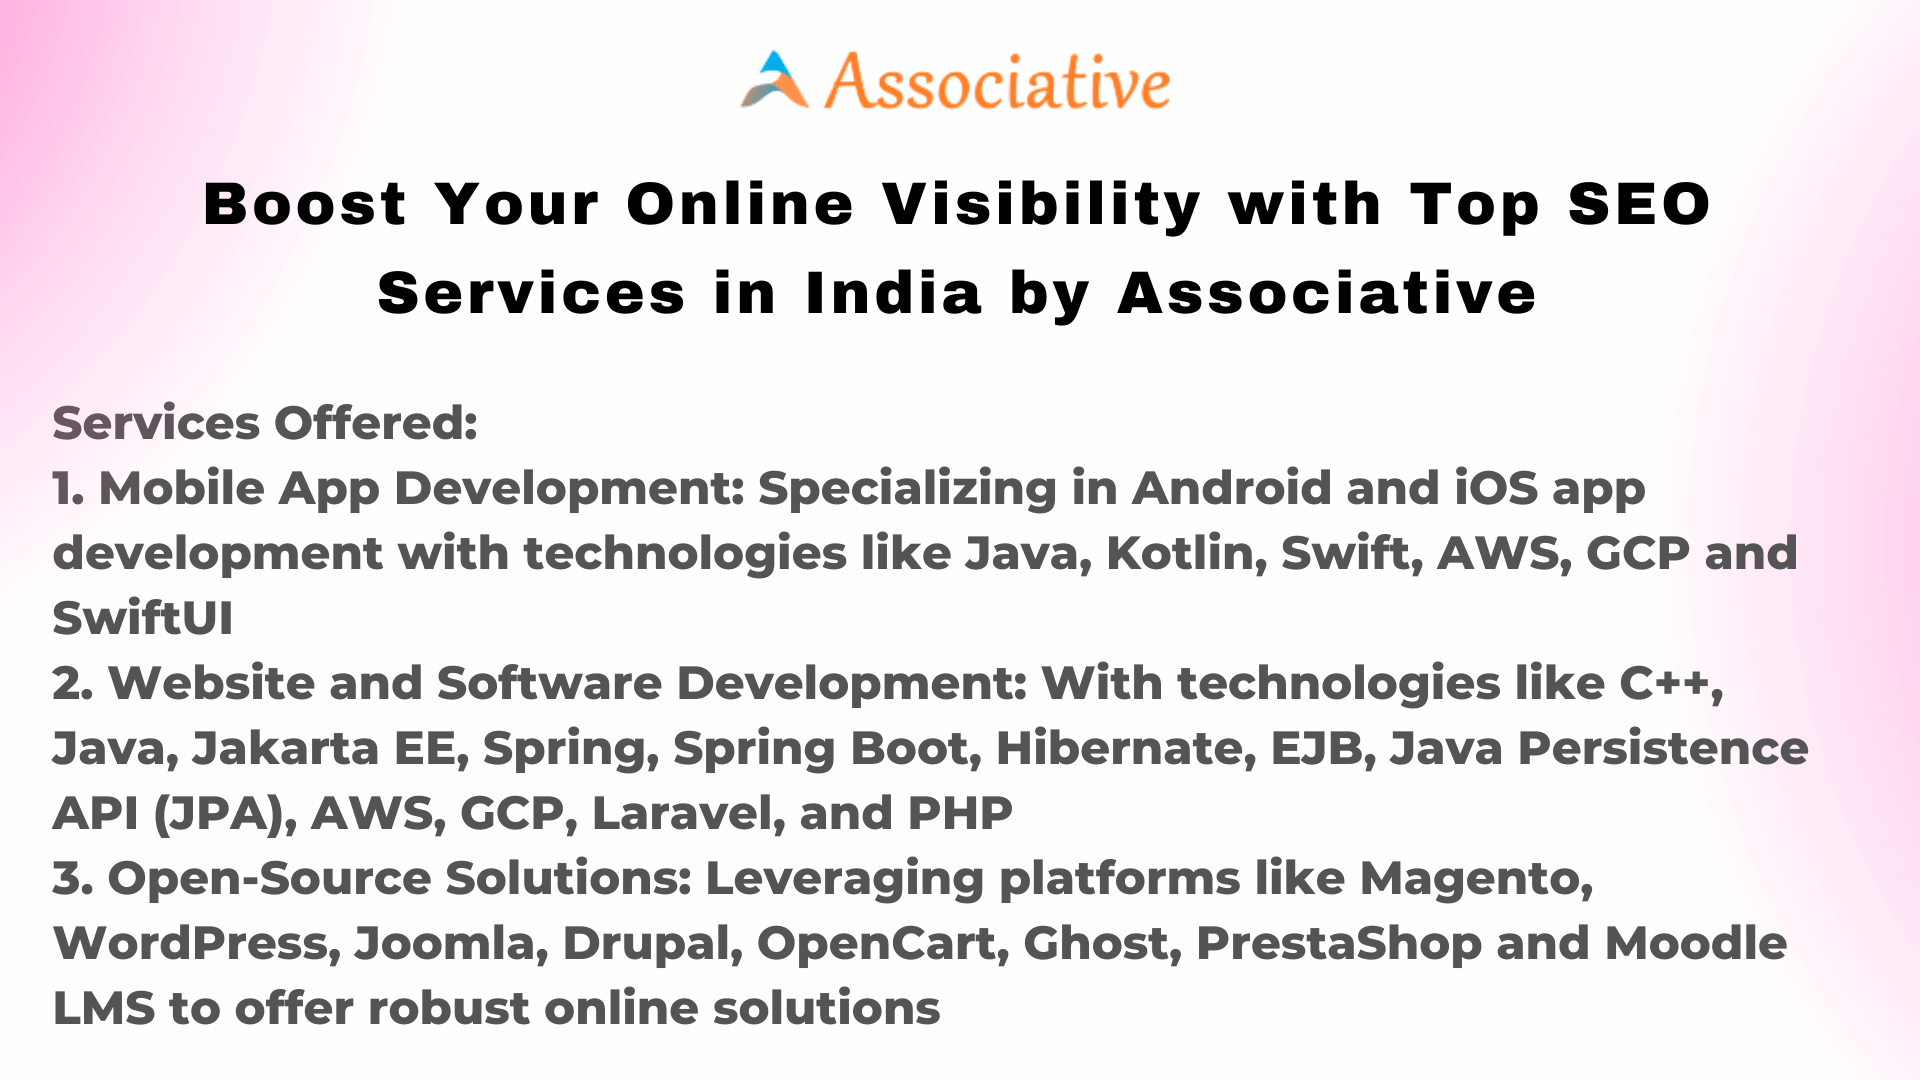 Boost Your Online Visibility with Top SEO Services in India by Associative